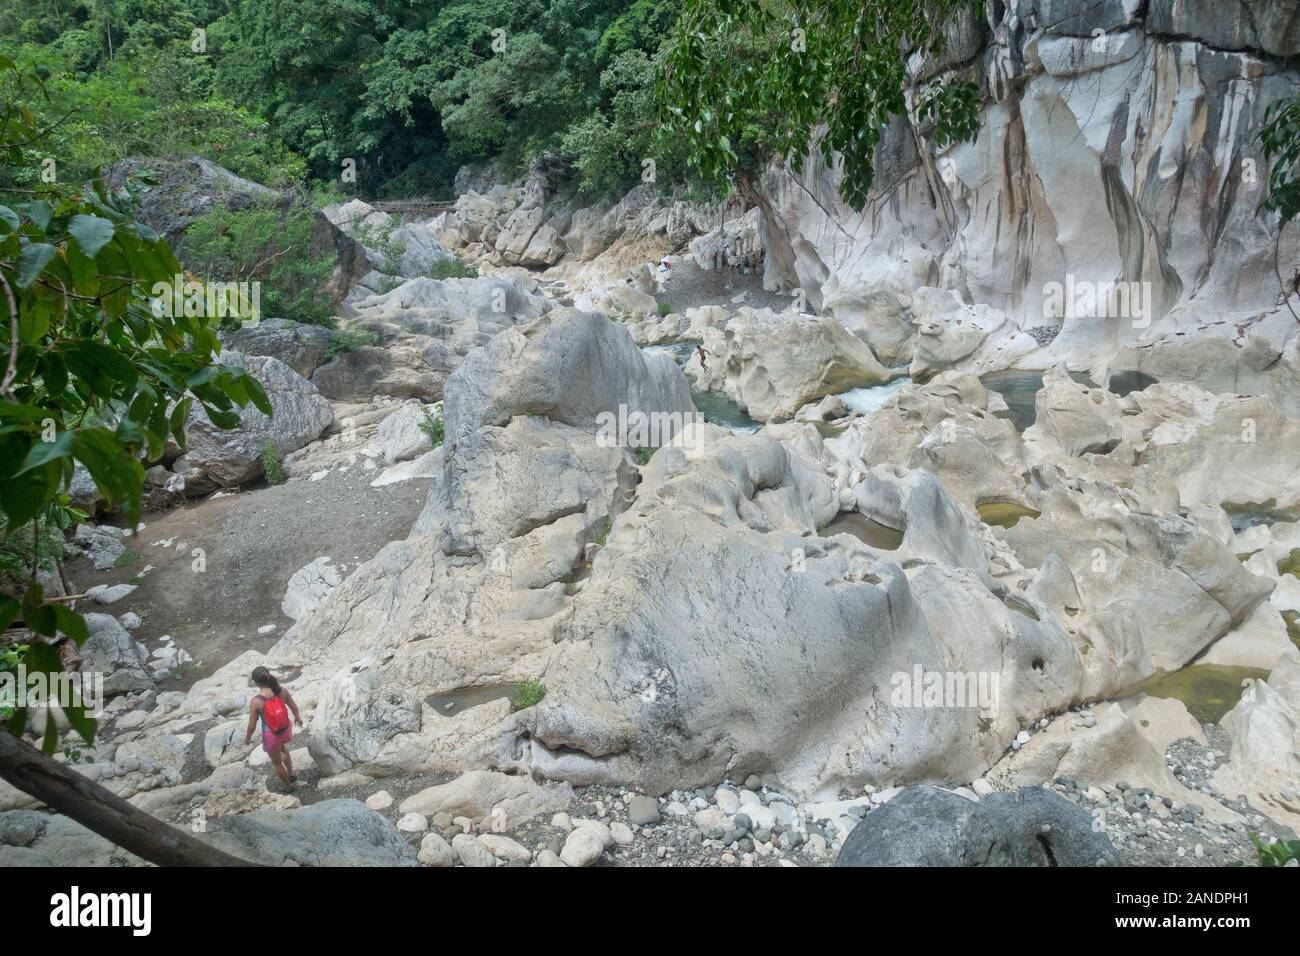 Tinipak River flows through mountainous terrain with rapids and cave with a natural swimming pool. Stock Photo